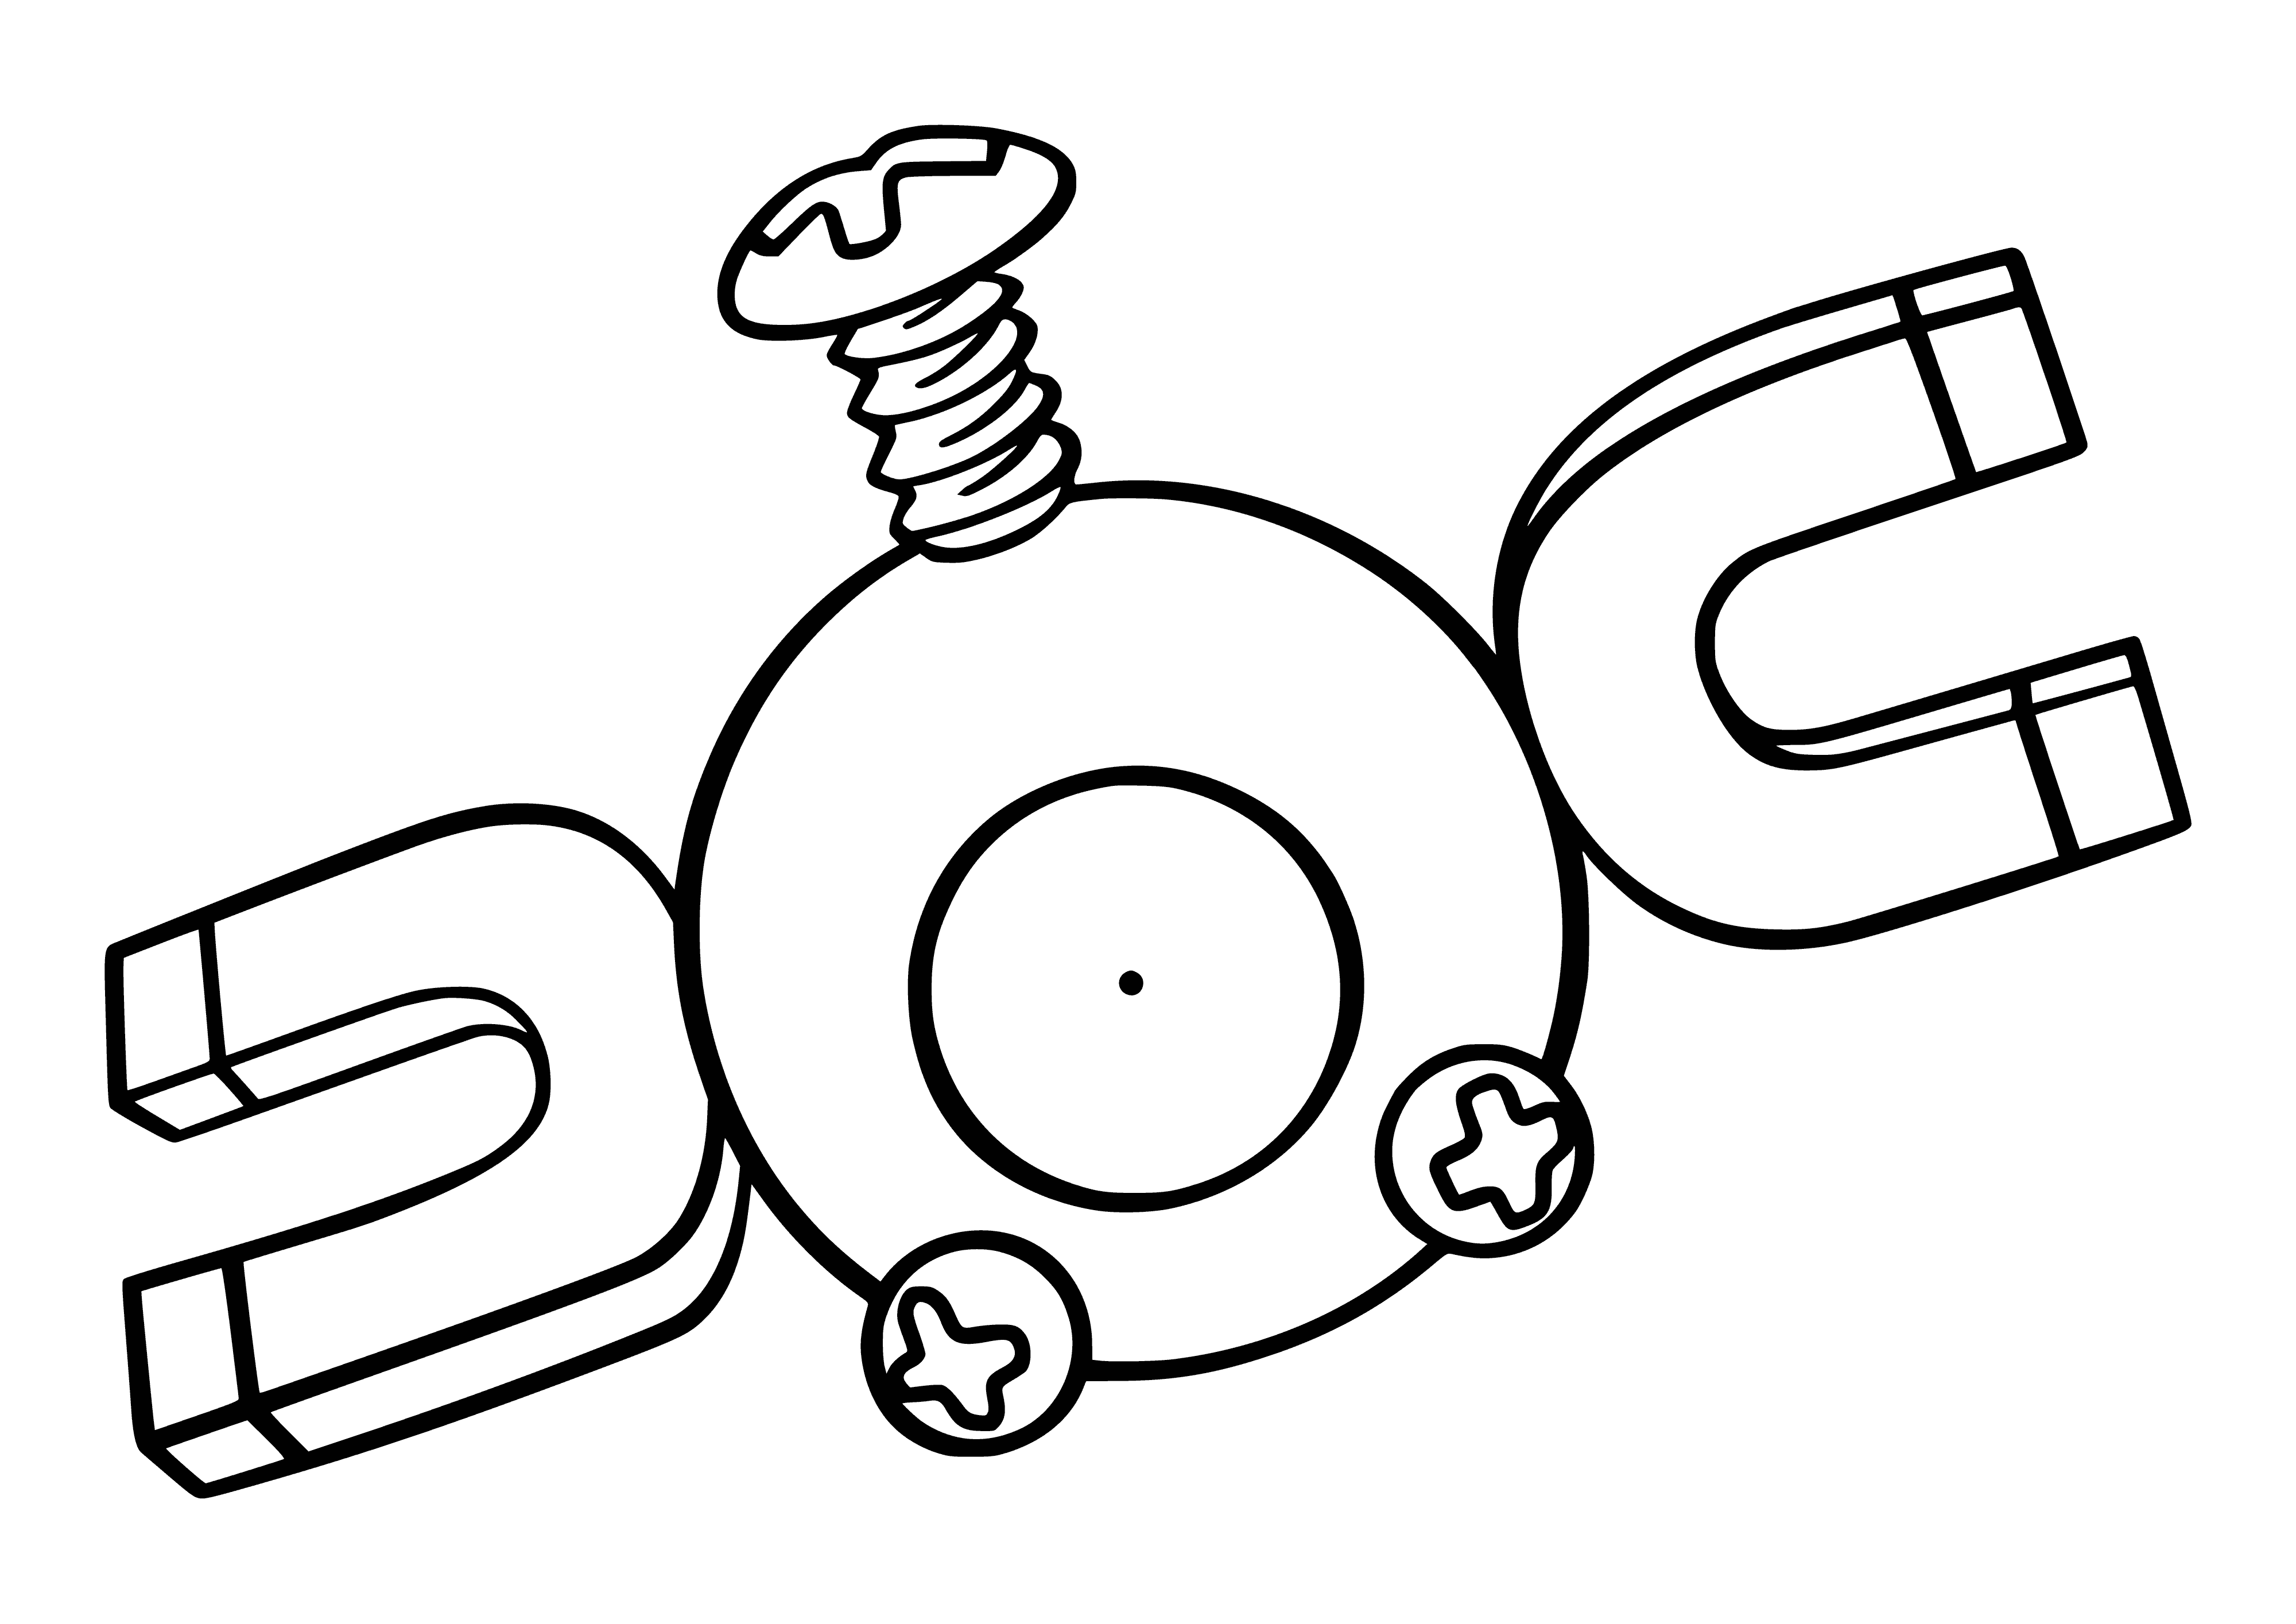 coloring page: Little, round blue Pokemon w/ red eyes & bolt-shaped mark; its body surrounded by thin, red aura.